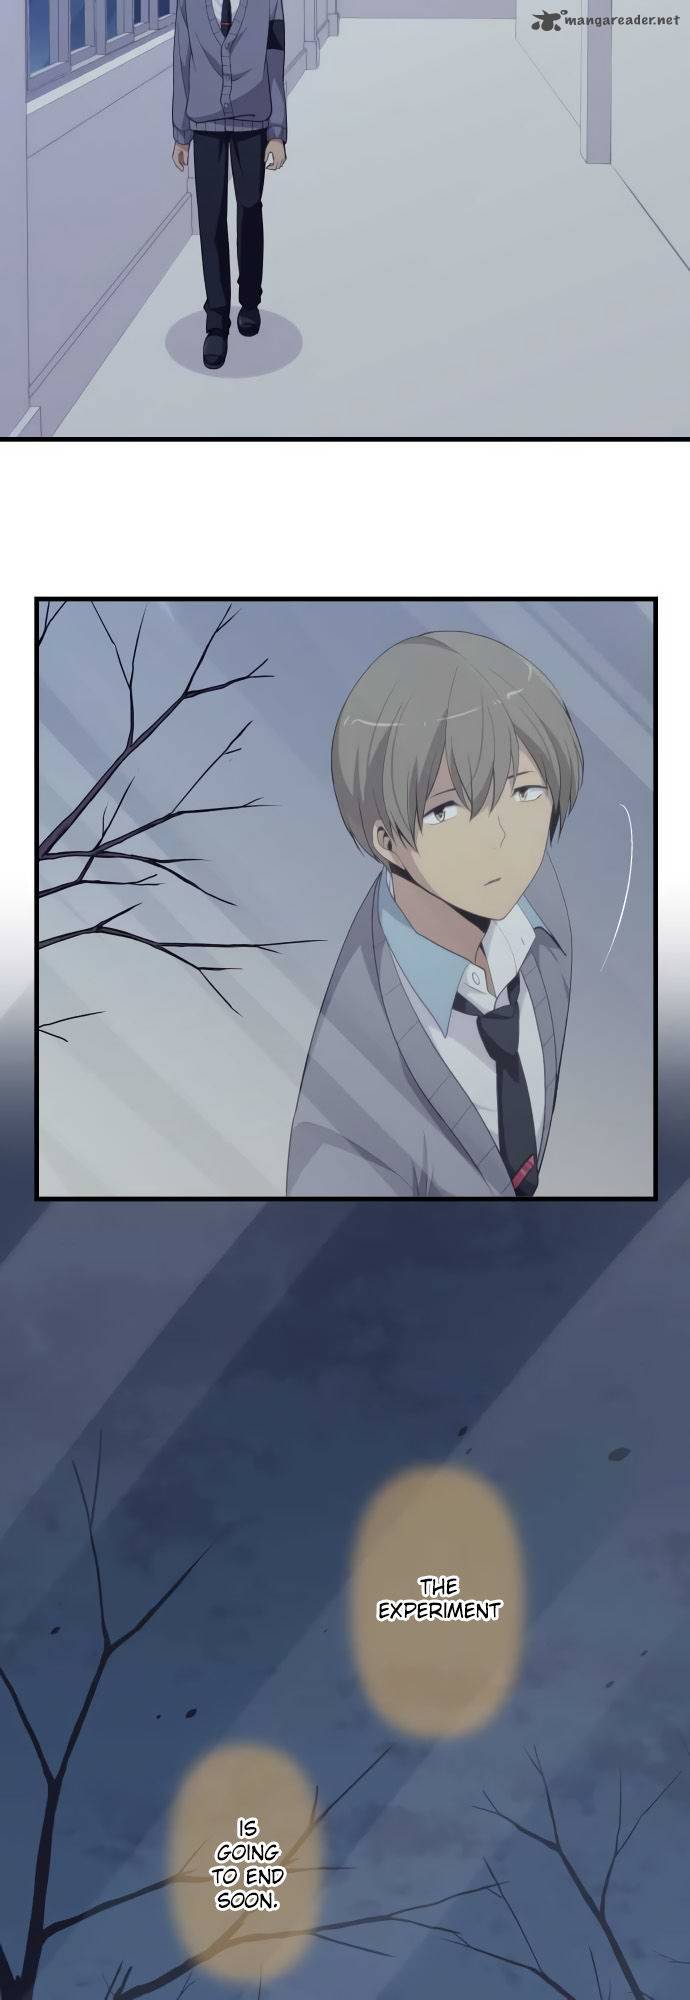 Relife 204 16